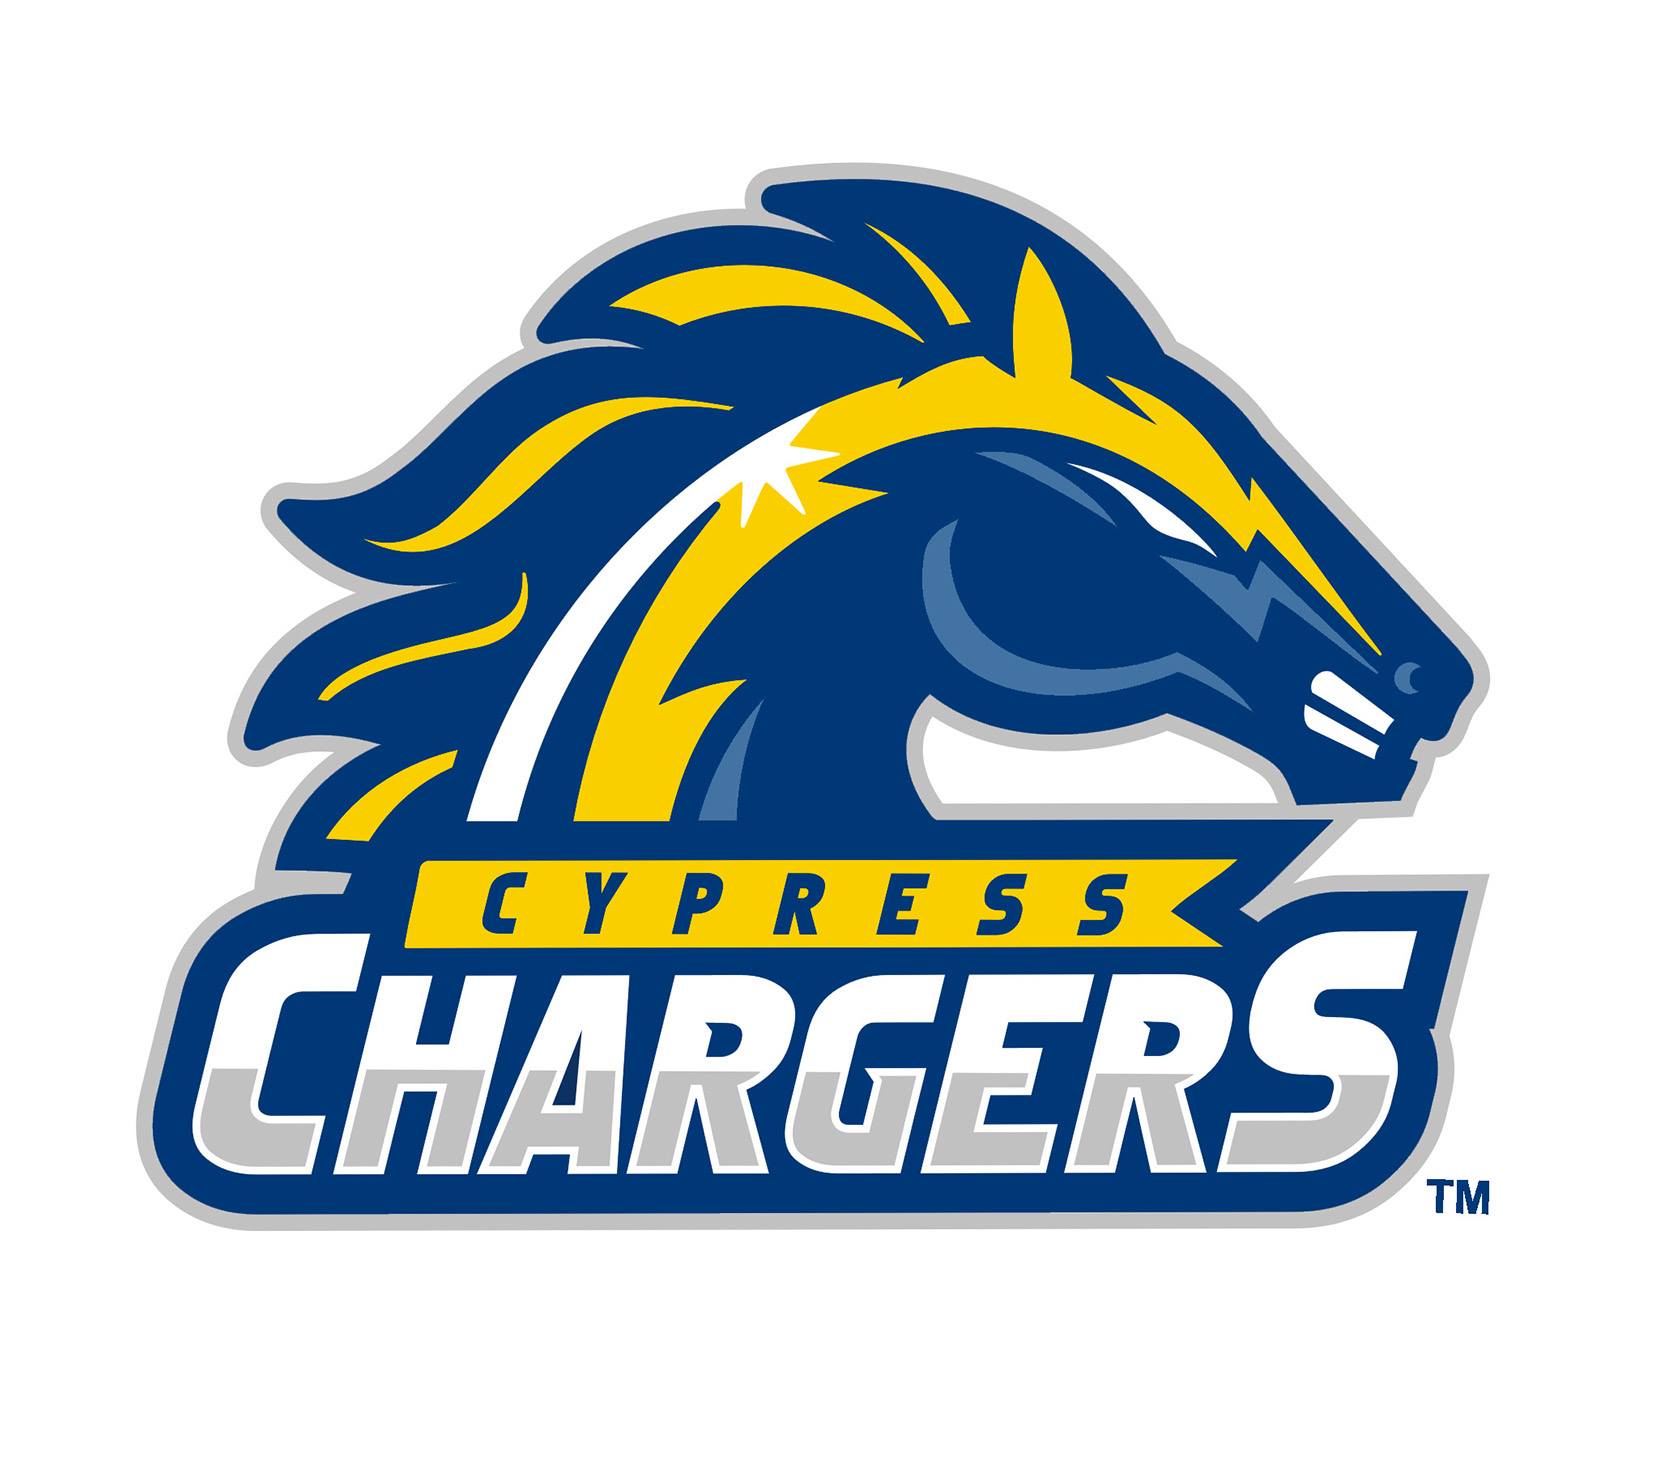 Chargers logo